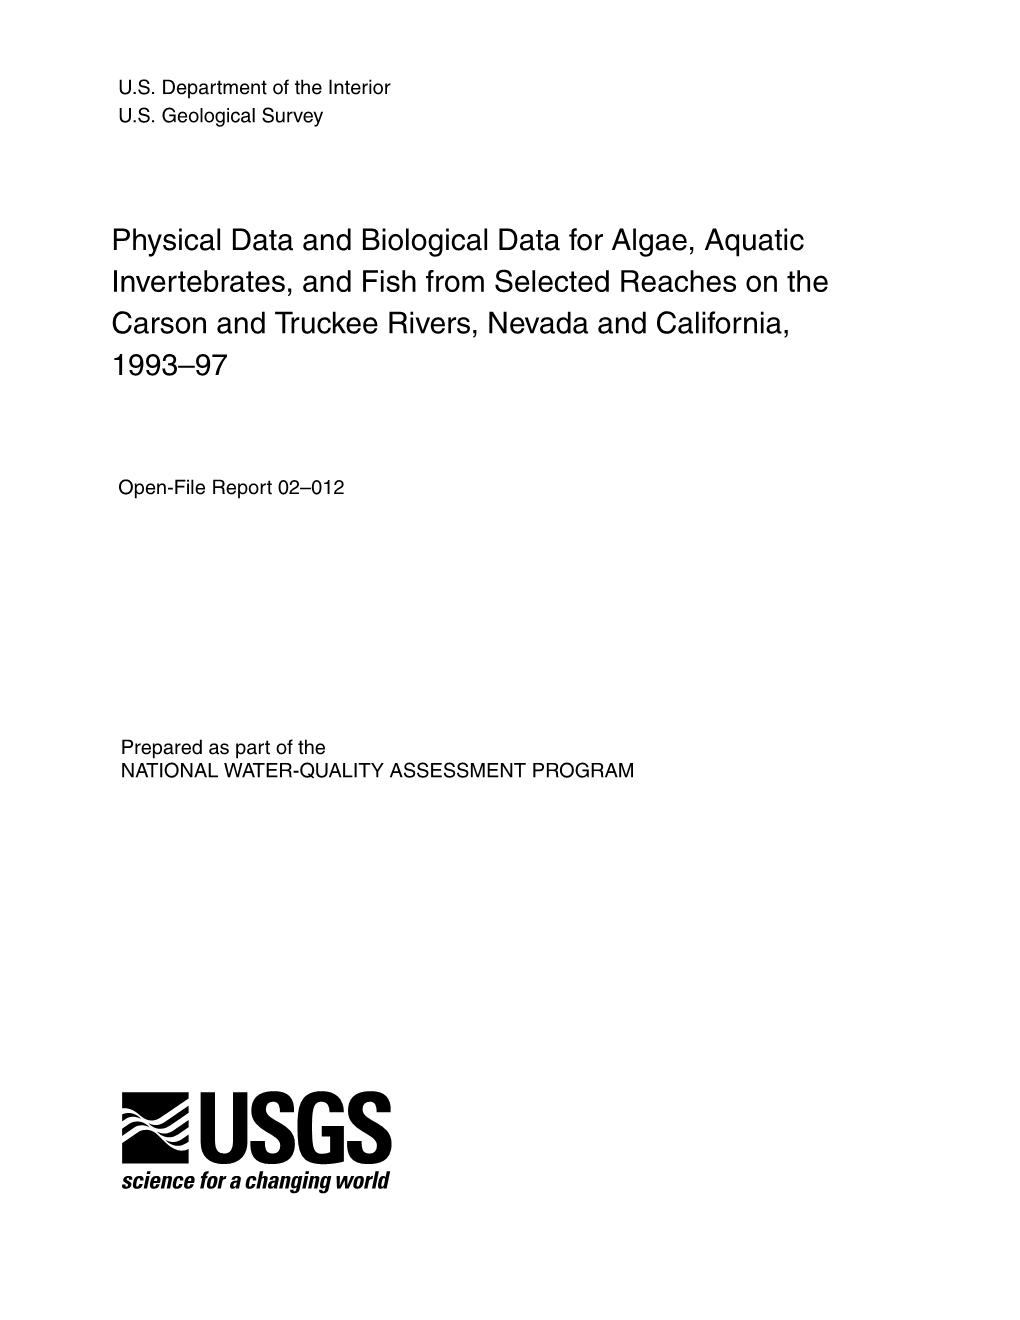 Physical Data and Biological Data for Algae, Aquatic Invertebrates, and Fish from Selected Reaches on the Carson and Truckee Rivers, Nevada and California, 1993–97